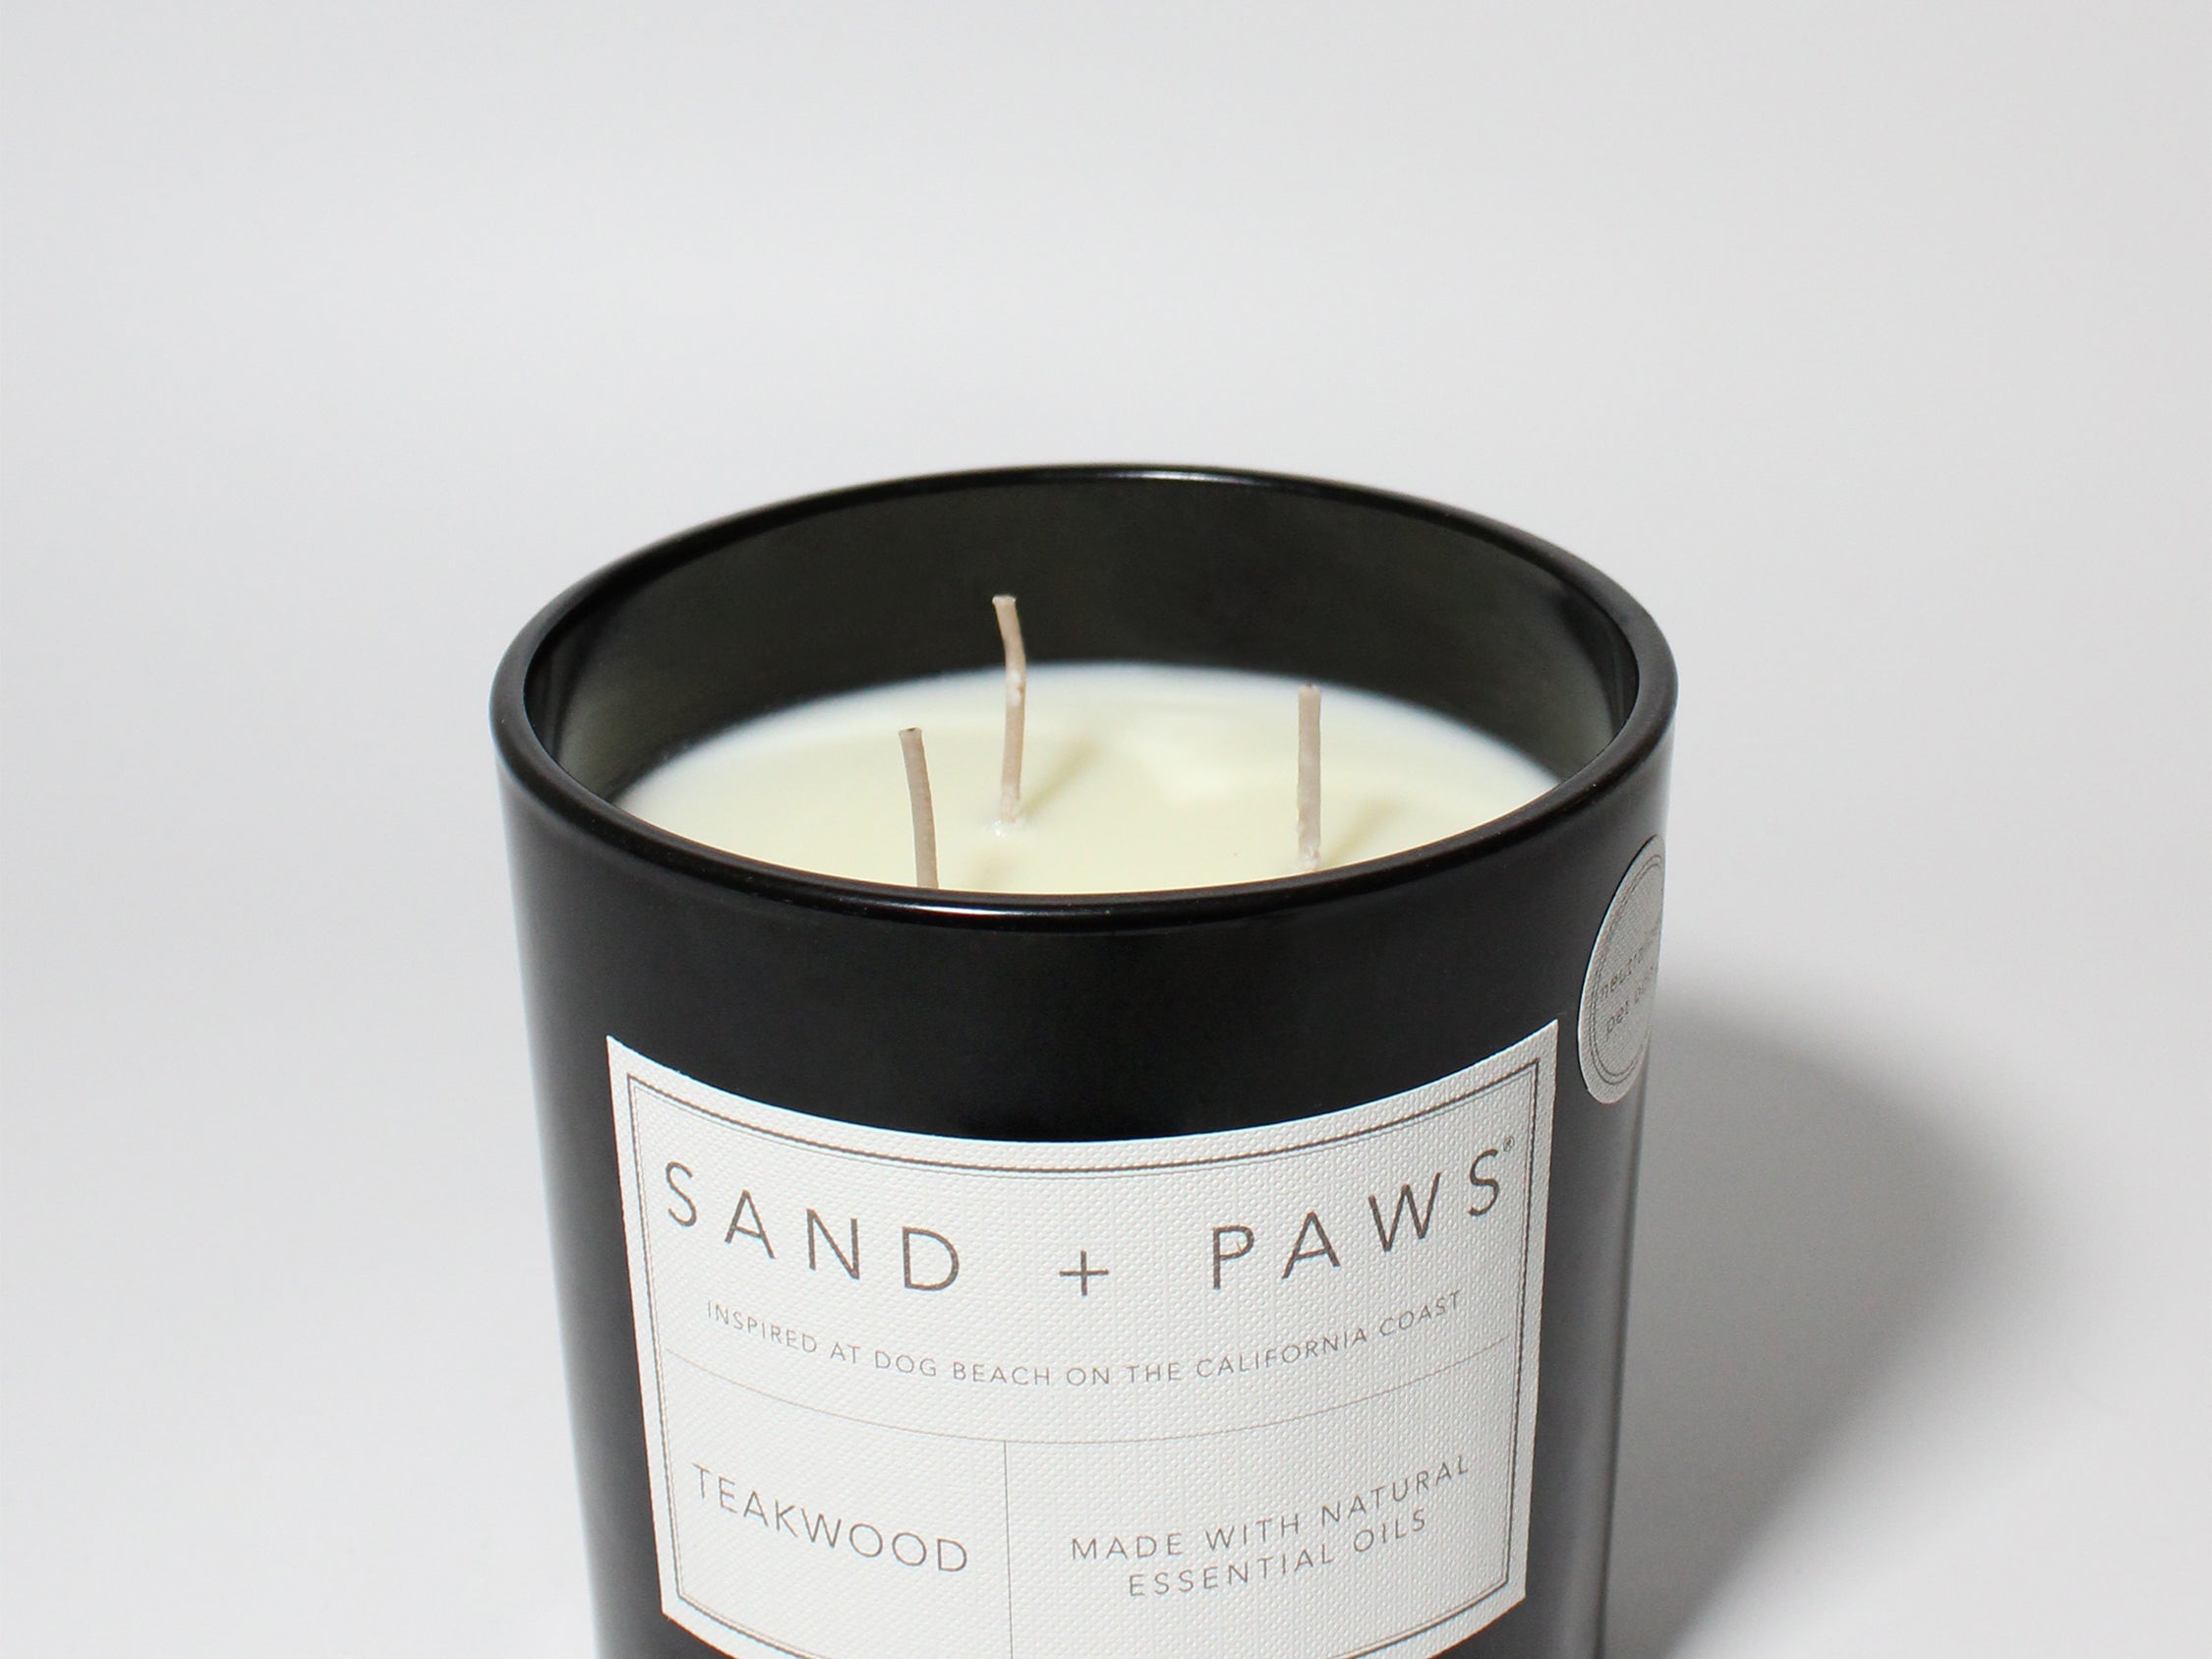 Sand + Paws Teakwood 21 oz scented candle Black vessel with Paw in Heart lid